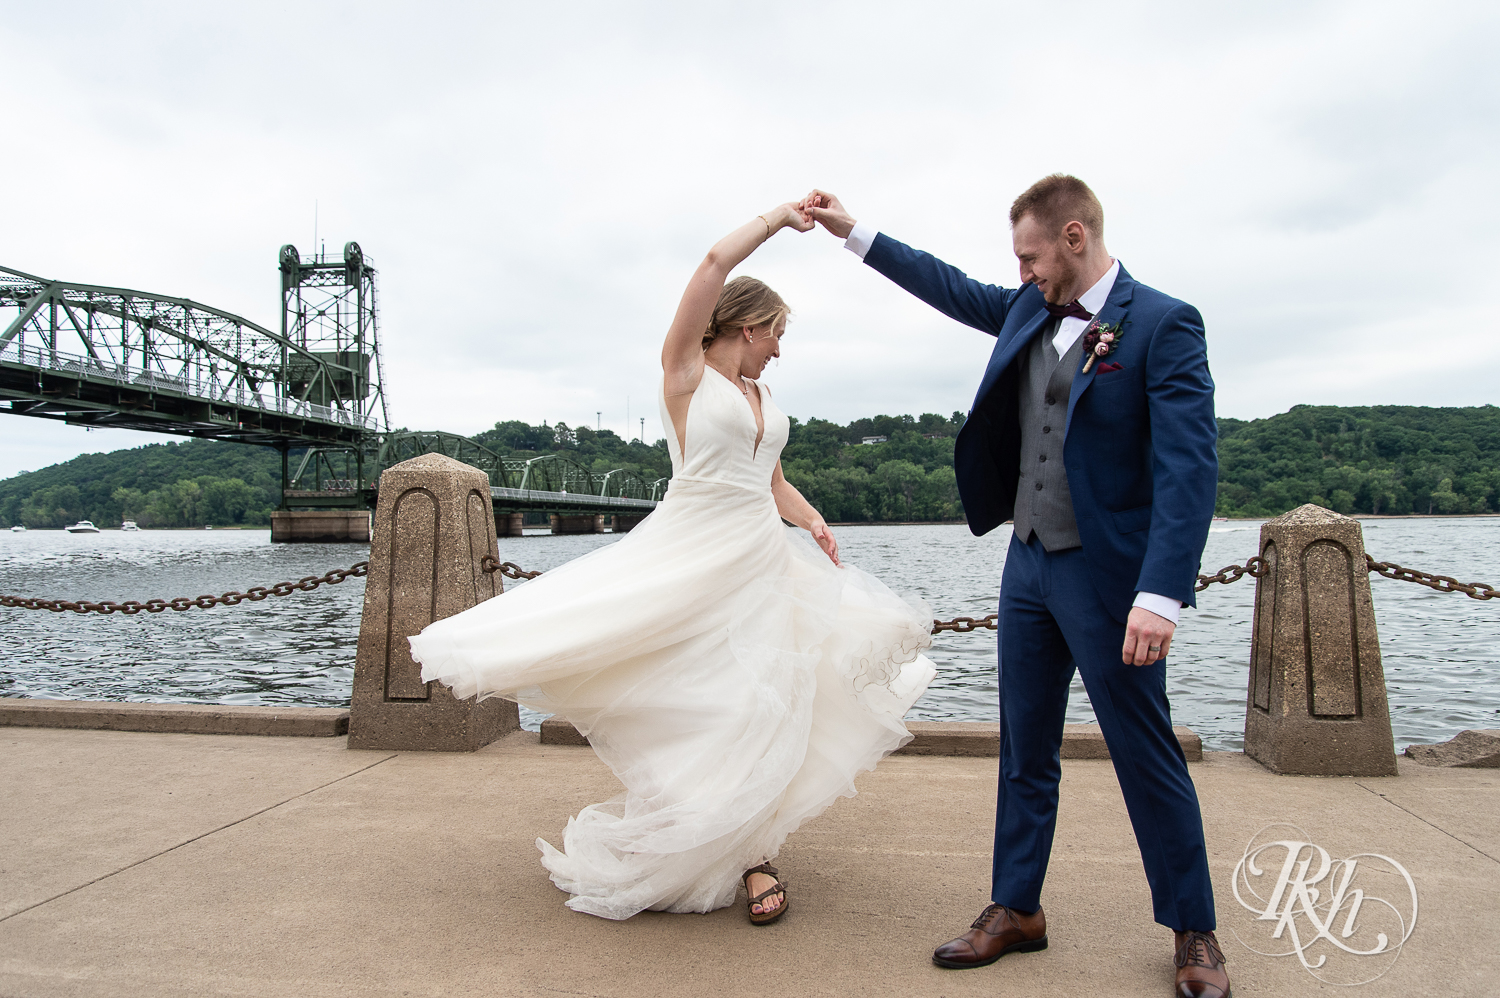 Bride and groom dance in front of St. Croix River in Stillwater, Minnesota.